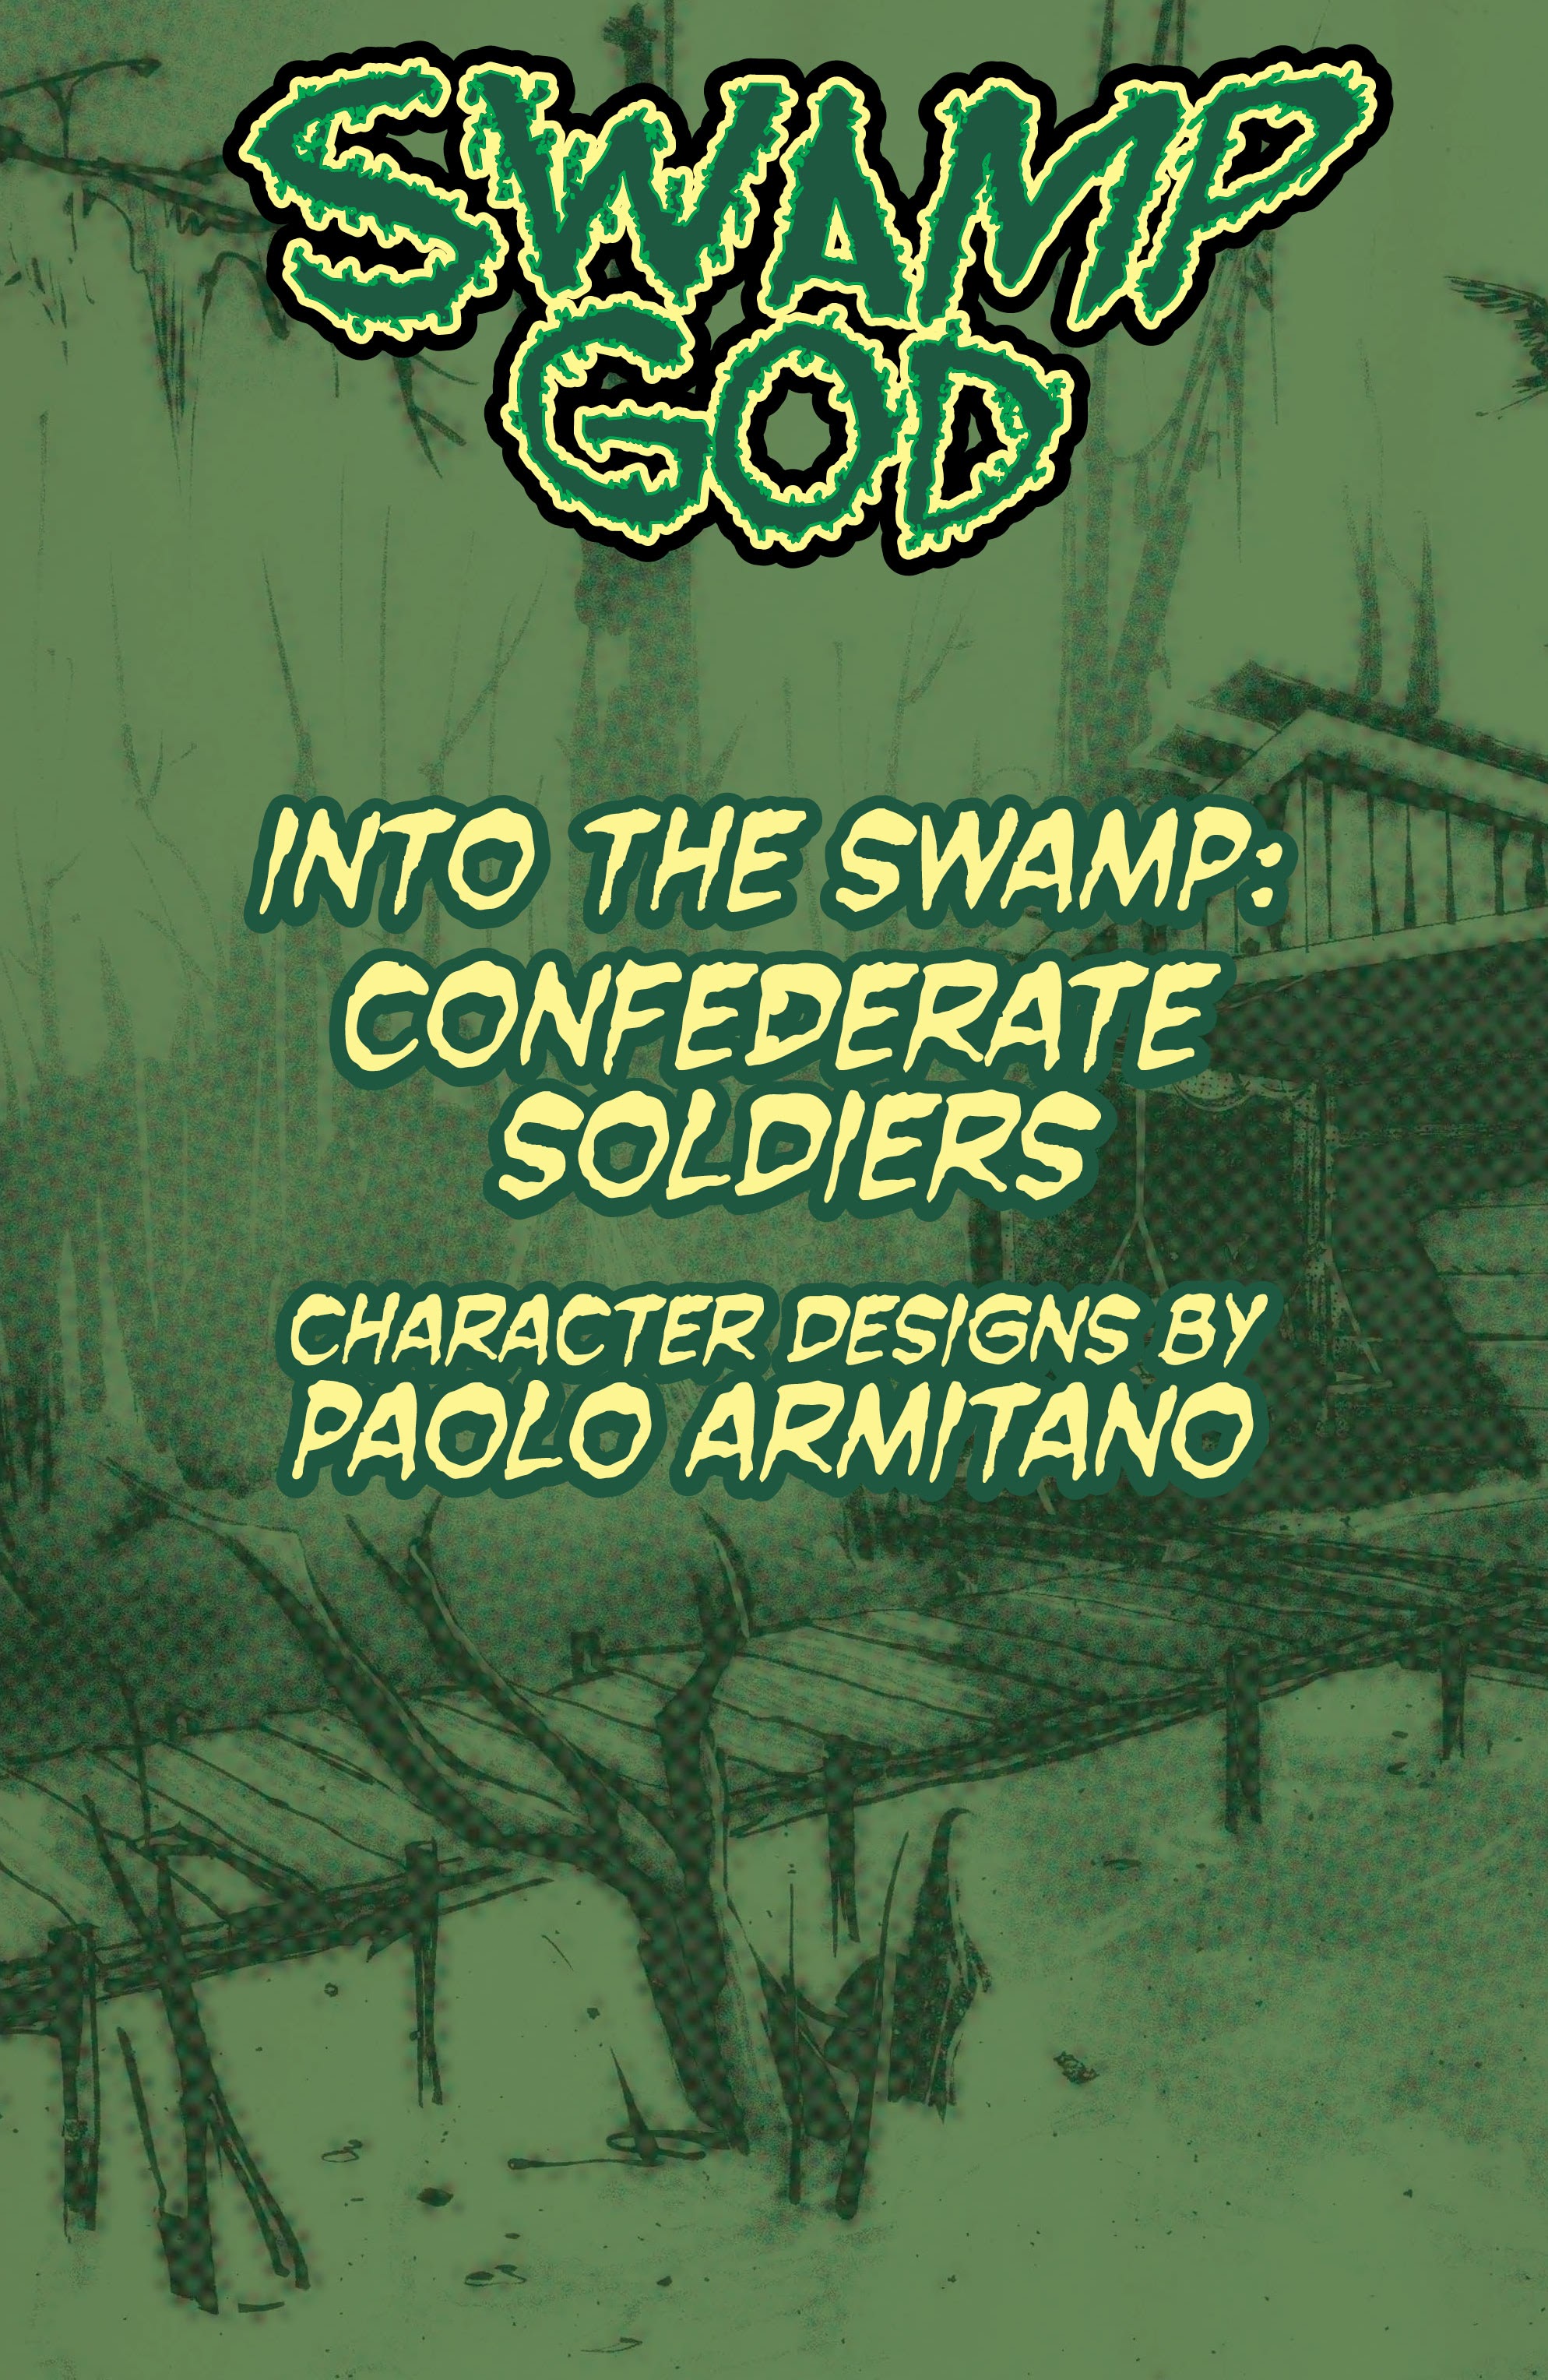 Read online Swamp God comic -  Issue #3 - 19